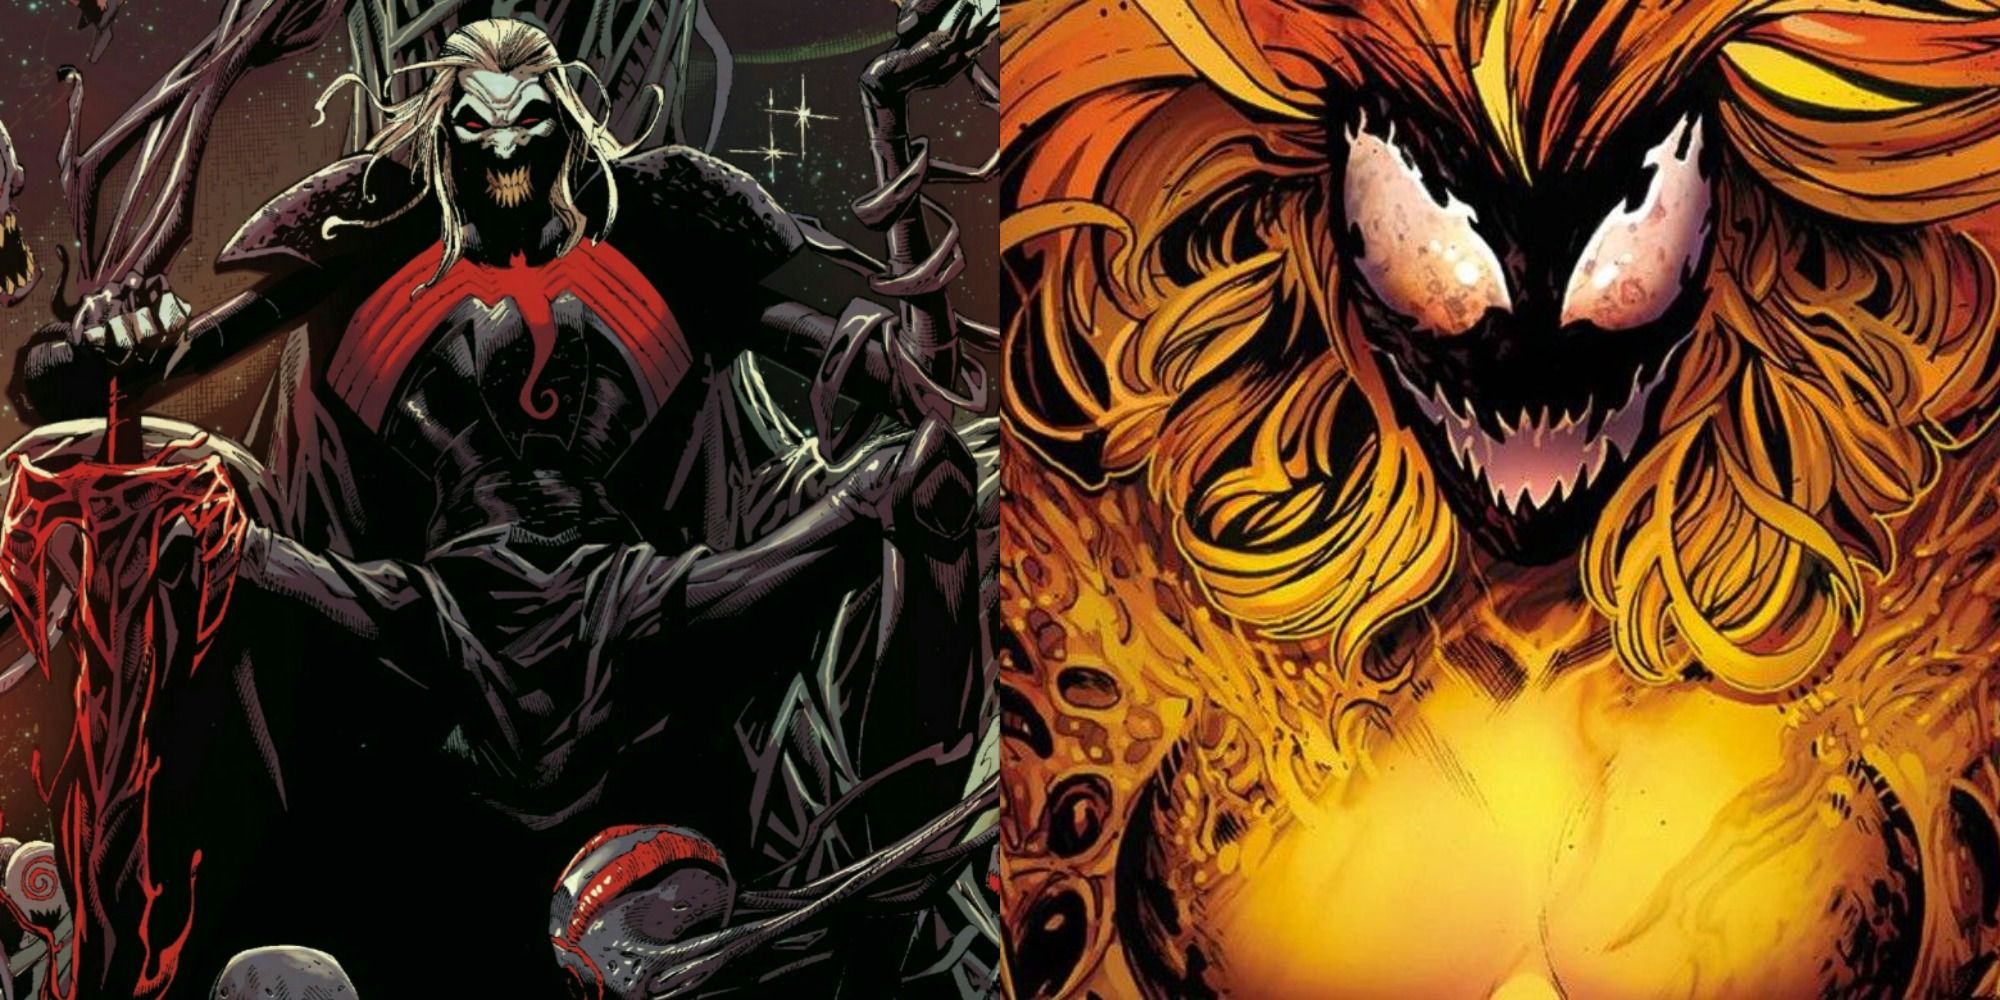 Split image depicting Knull, King of Symbiotes, and the Scream Symbiote